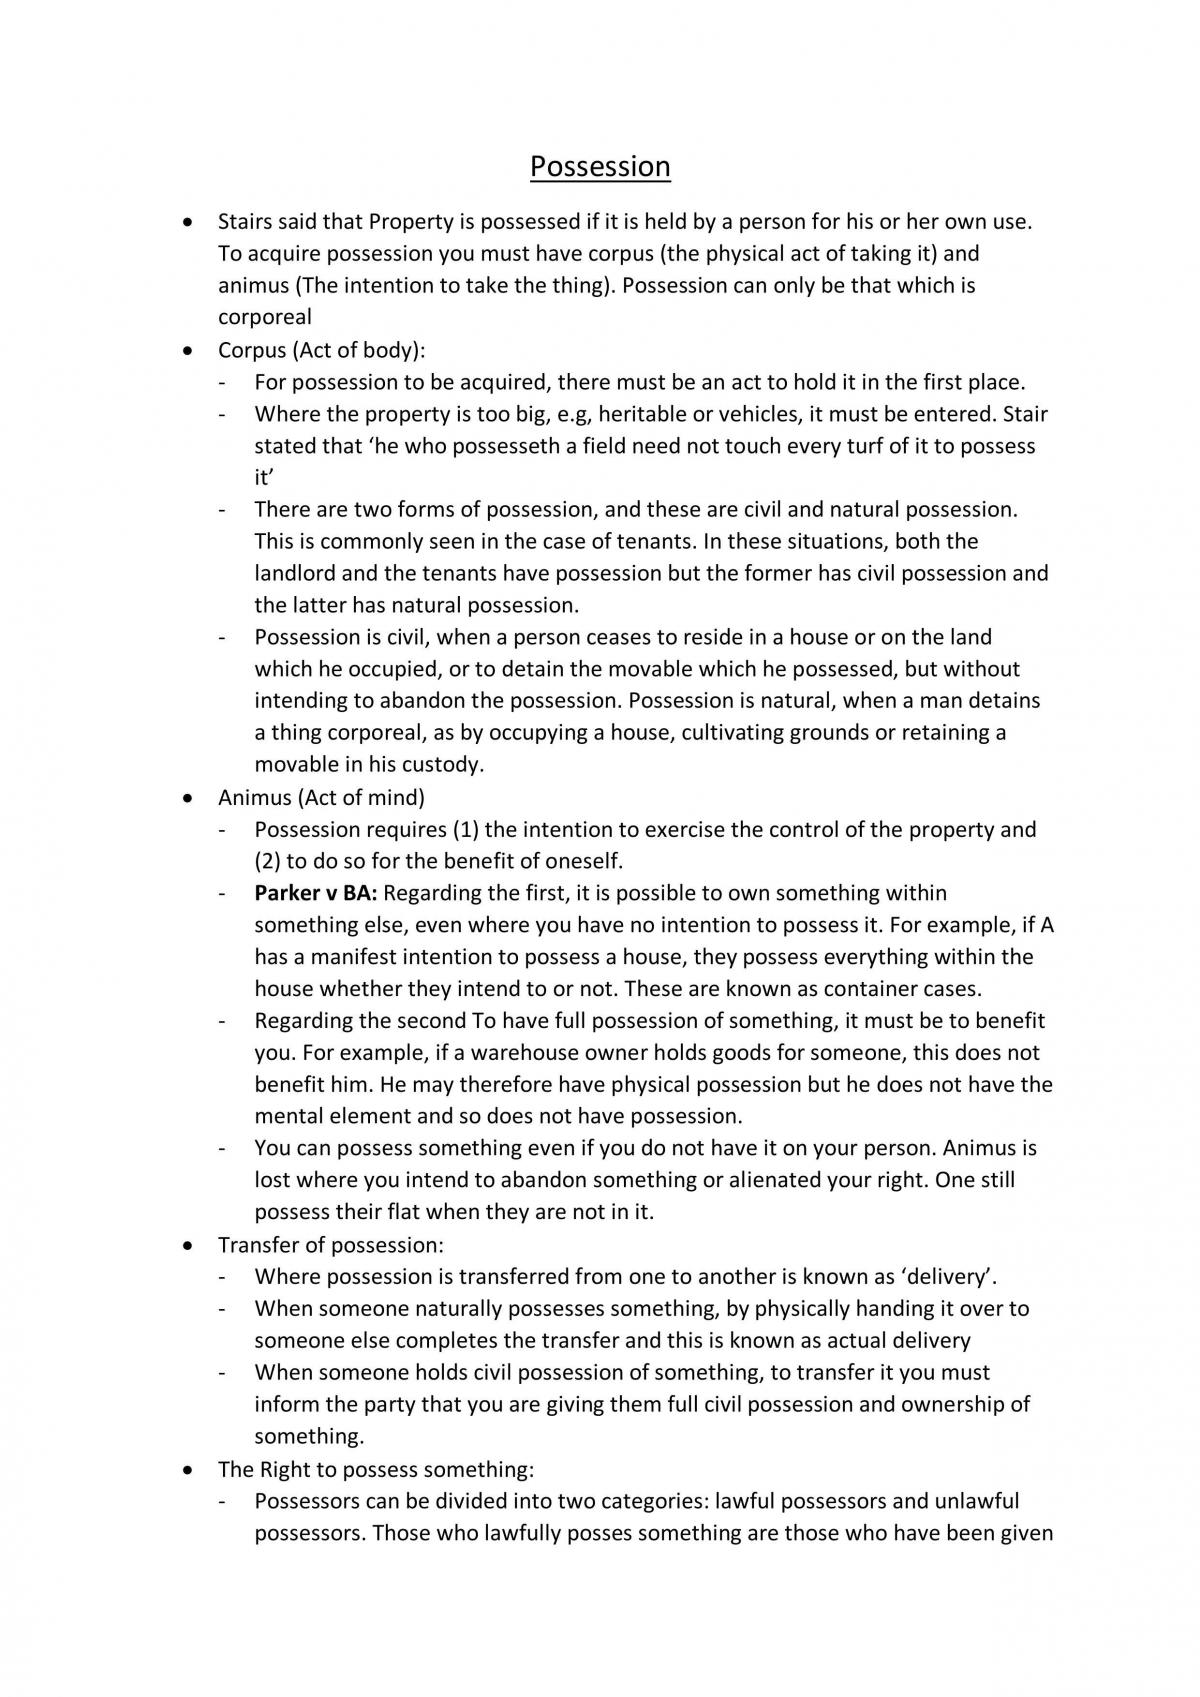 Full notes for Property, Trusts and succession - Page 11